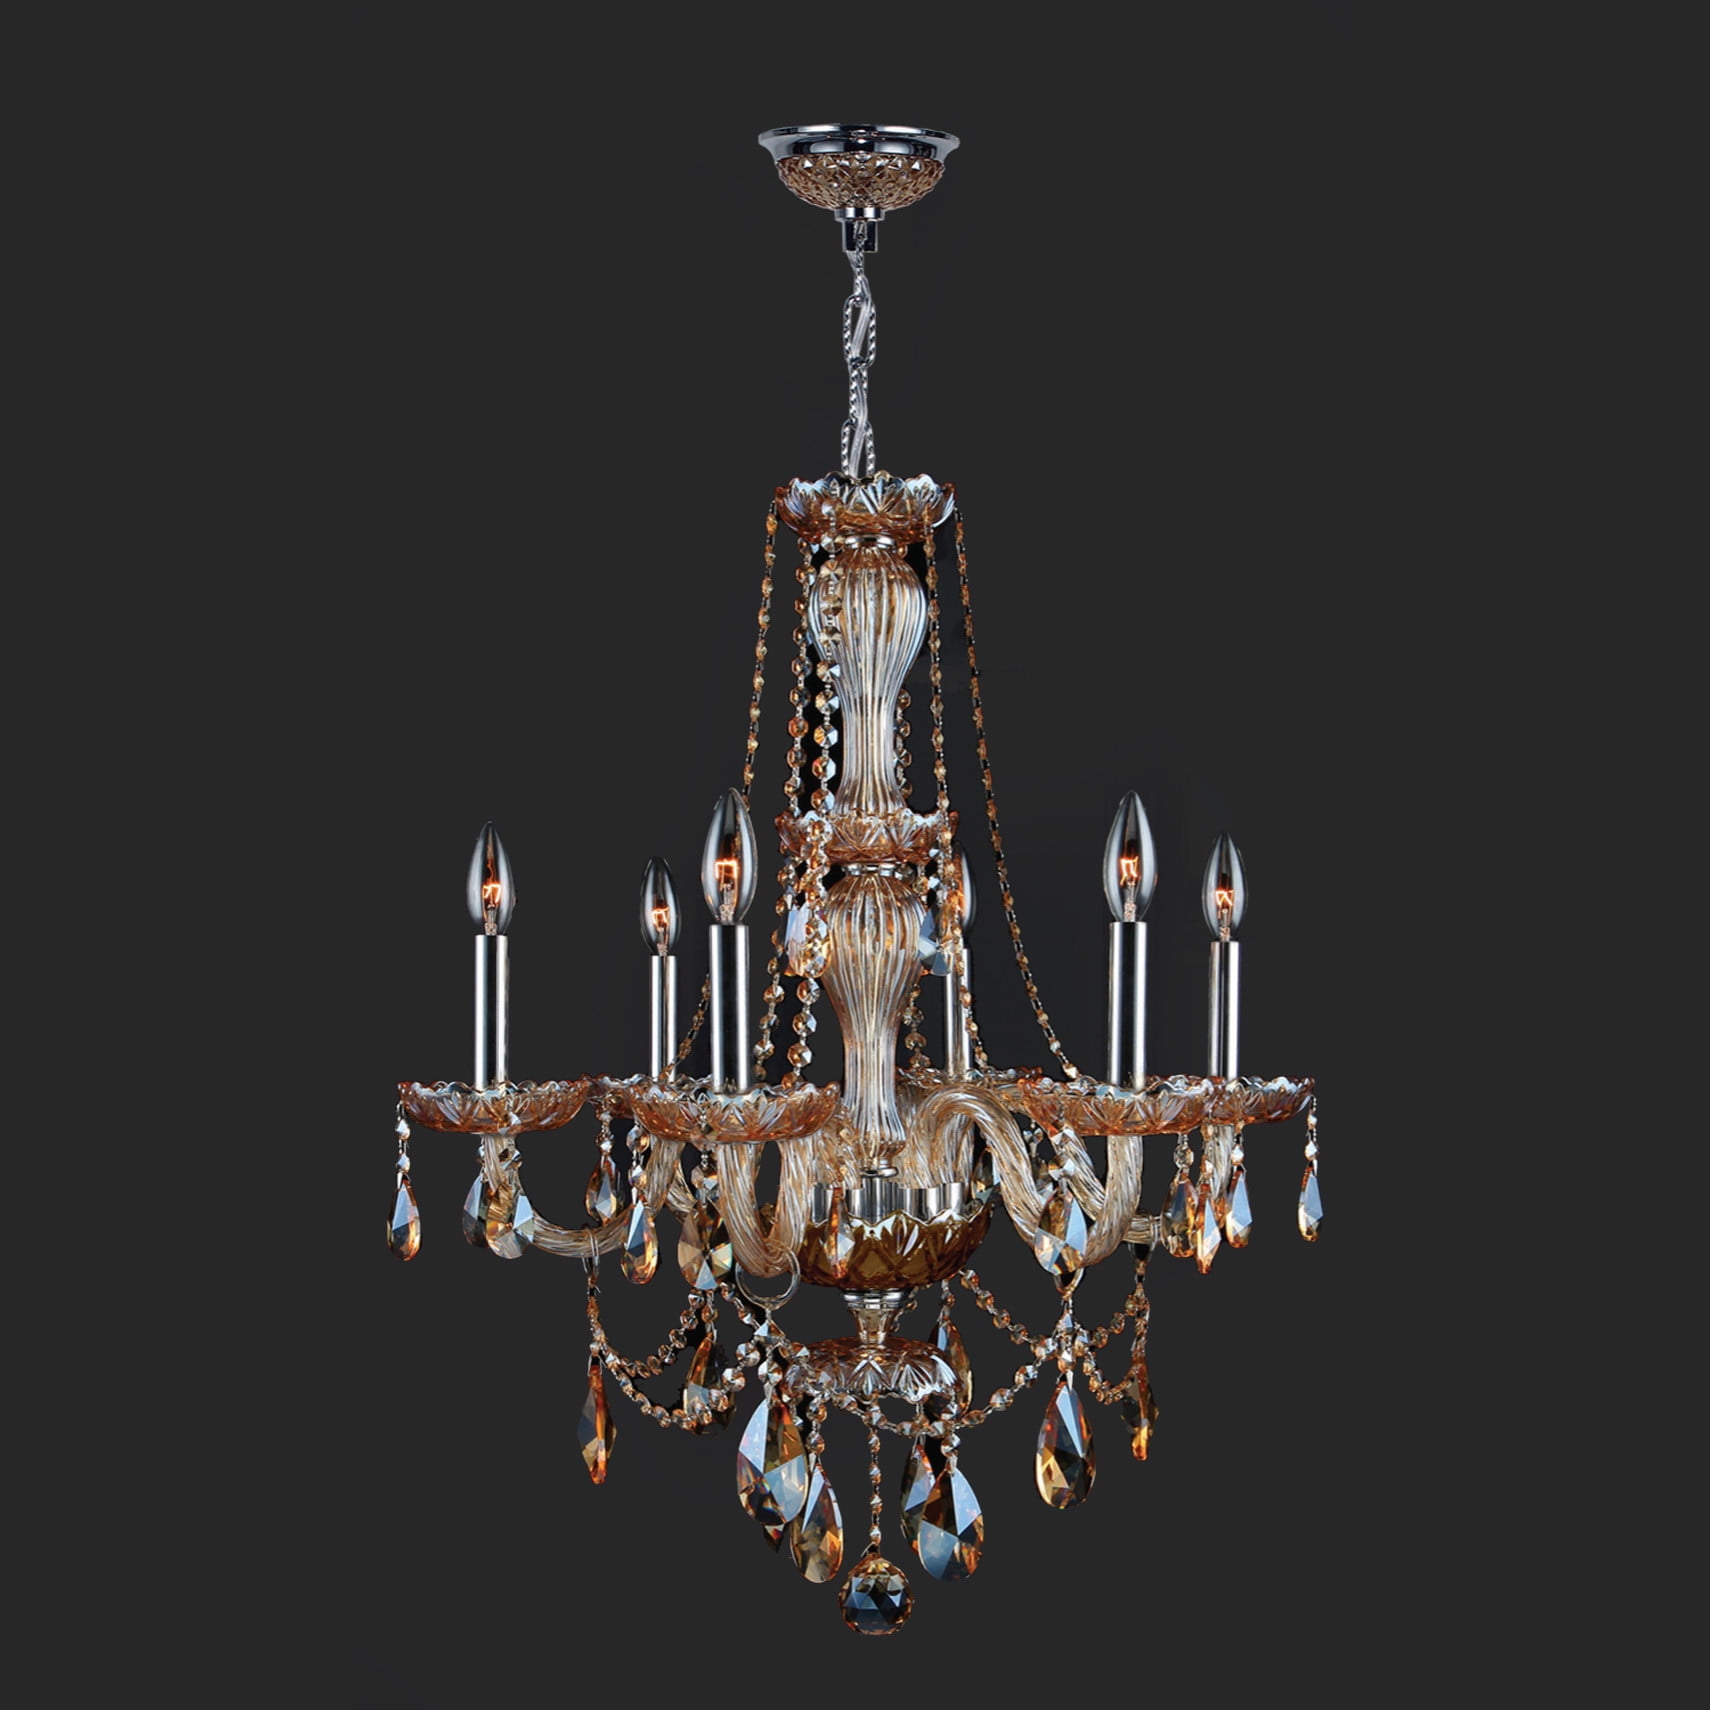 Provence Collection 6 Light Chrome Finish and Amber Crystal Chandelier 23" D x 31" H Medium